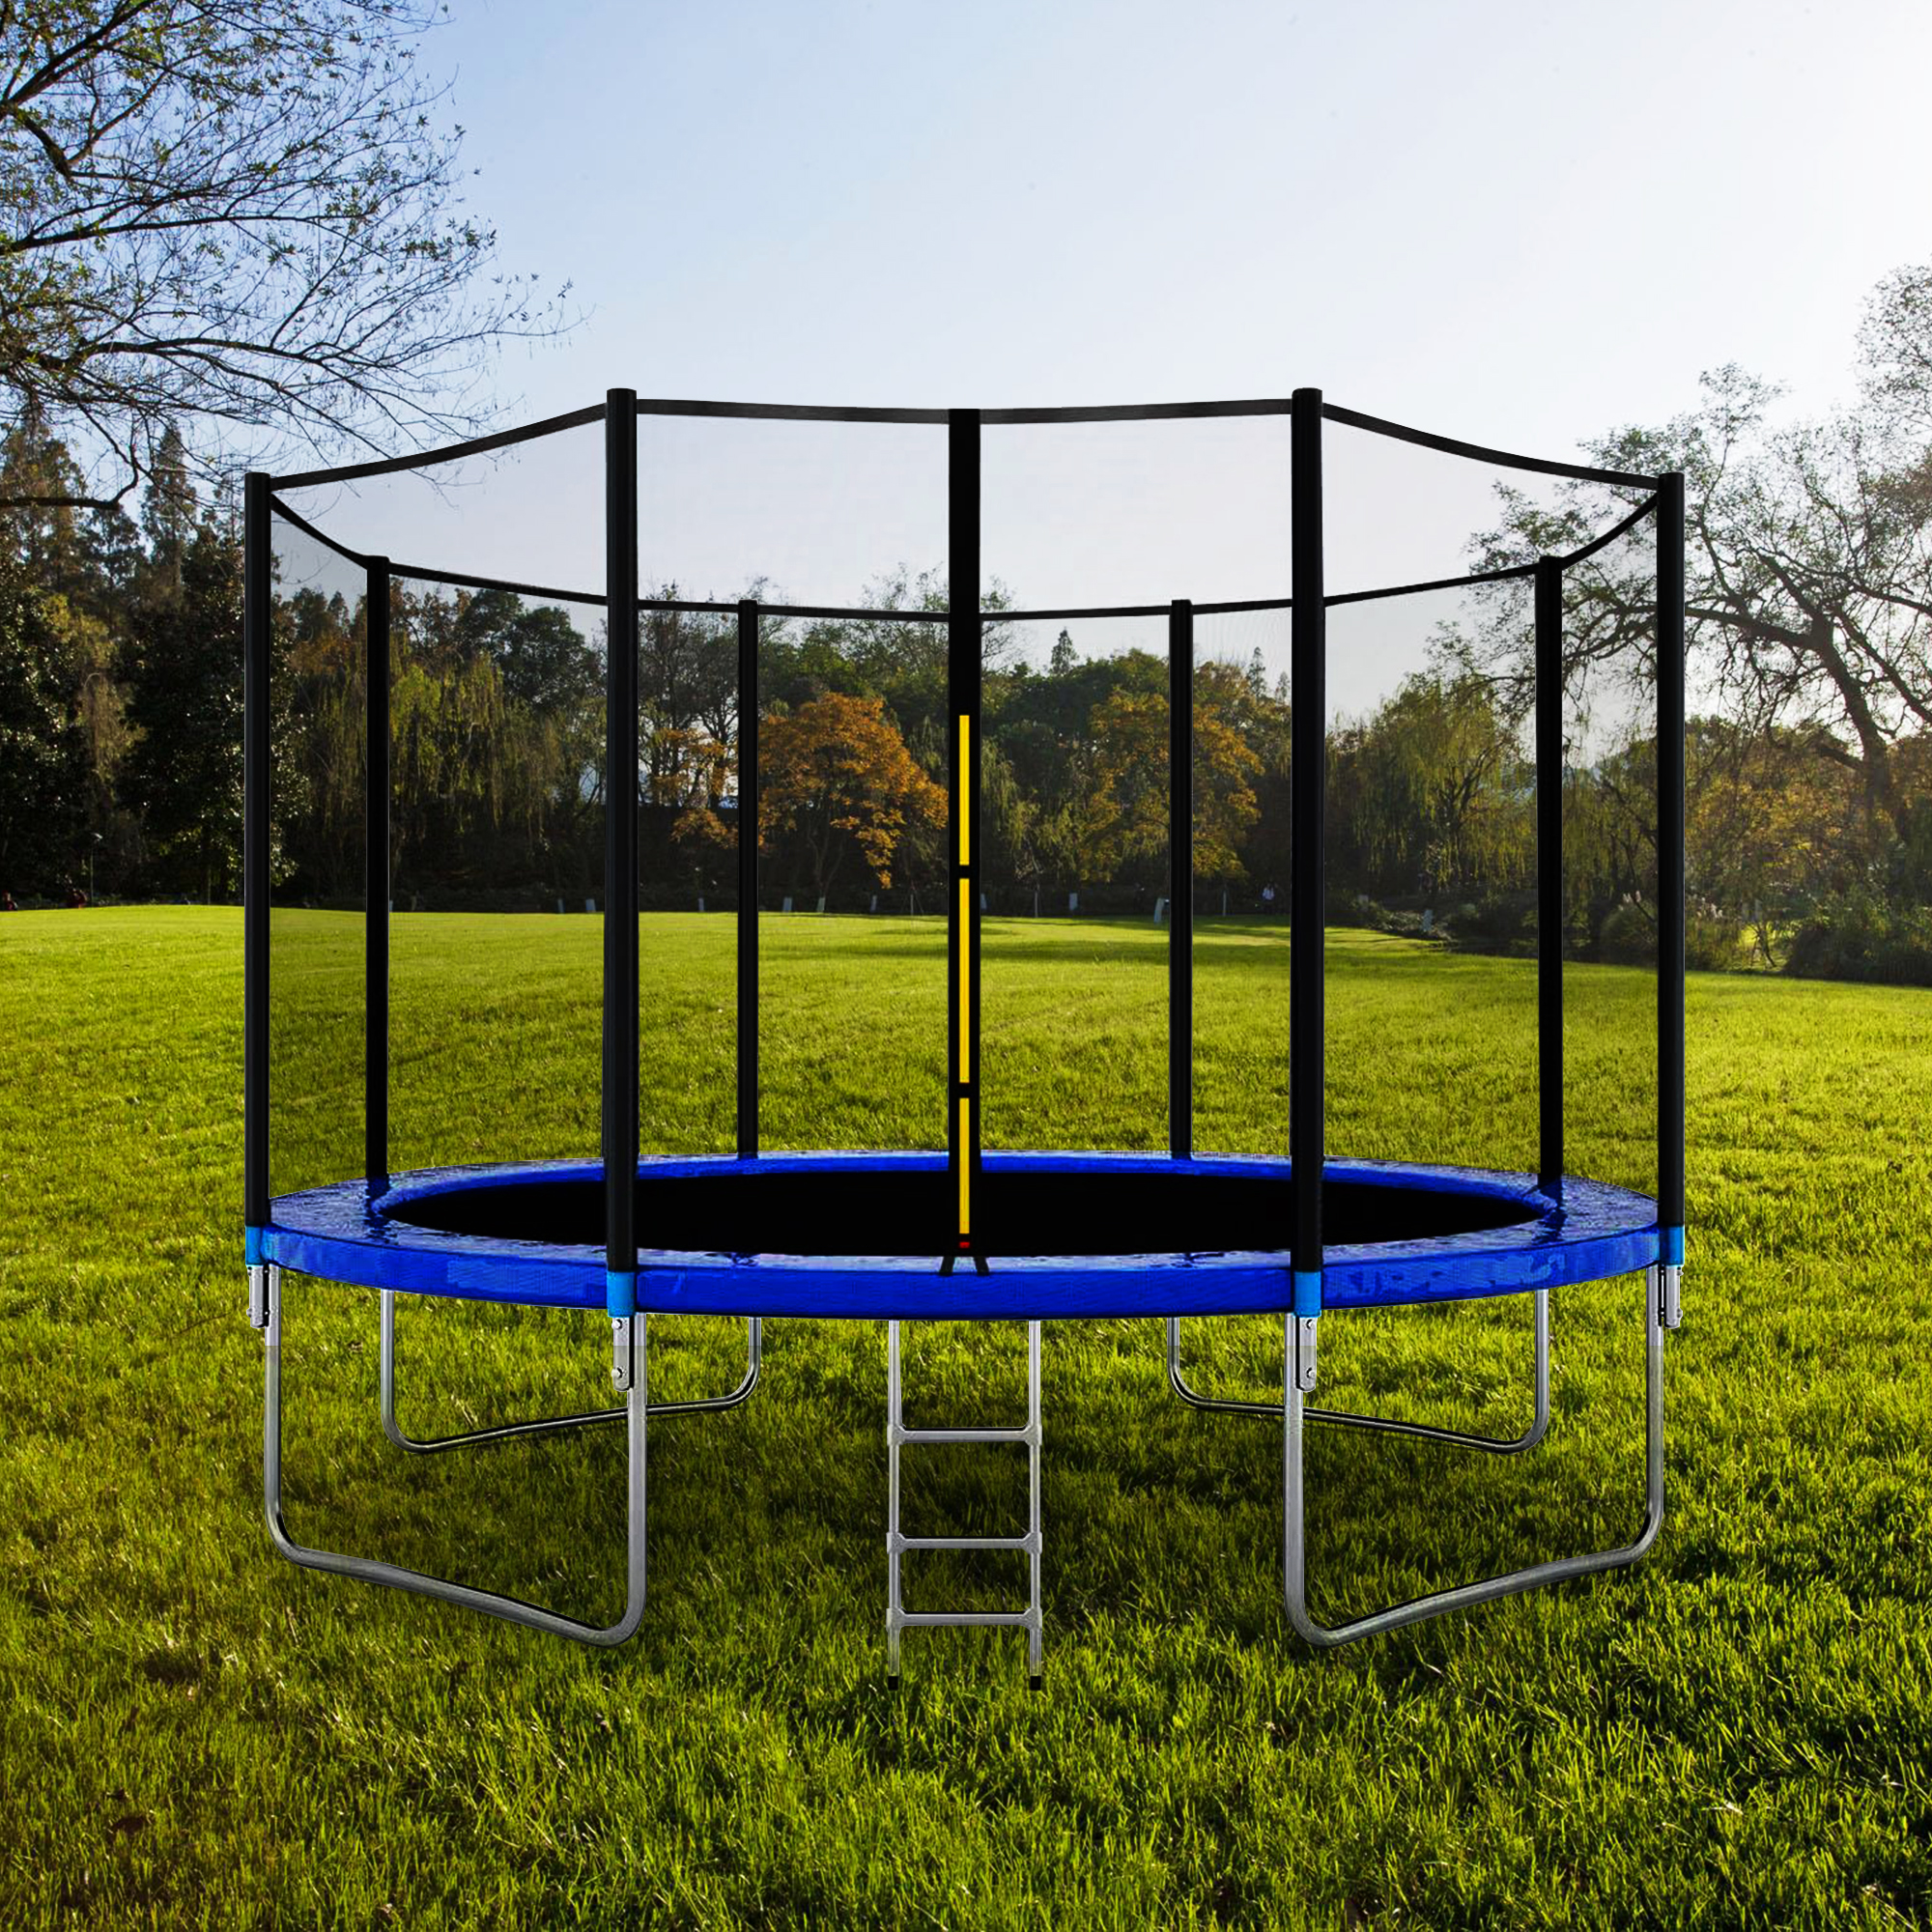 Looking to Buy The Best Trampoline This Year. Discover The Top 10 Trampolines of 2023